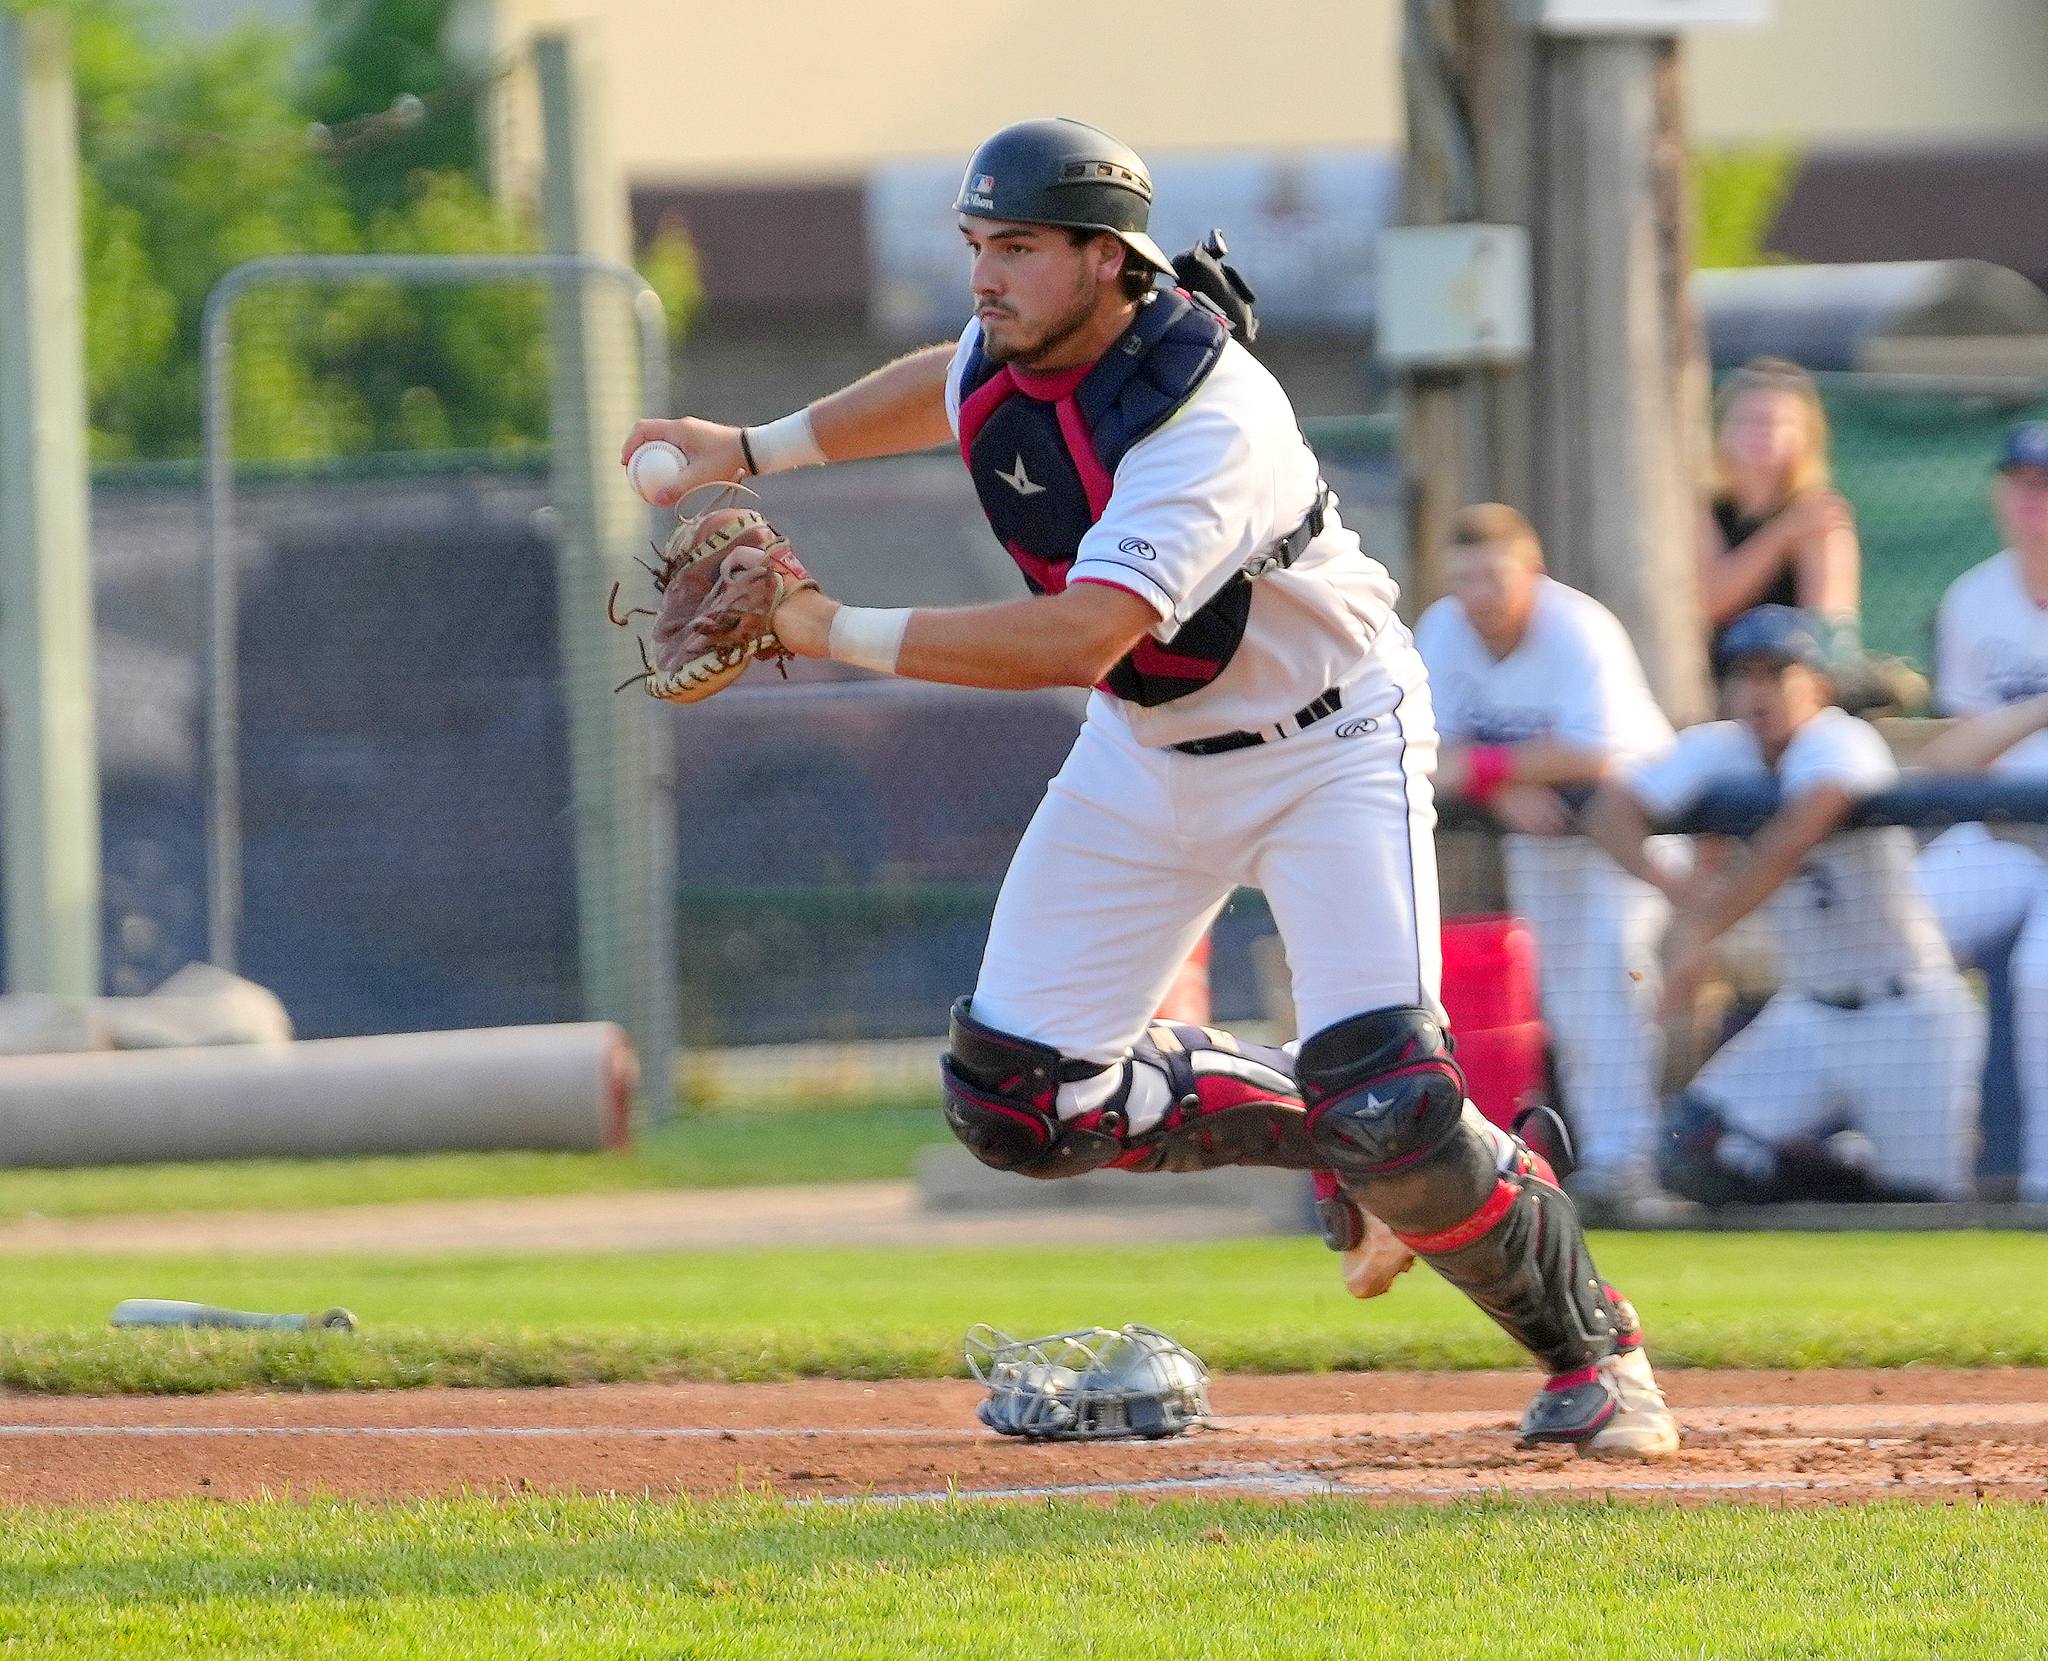 Muskegon Clippers escape with 11-9 victory over Xenia Scouts in series opener at Marsh Field